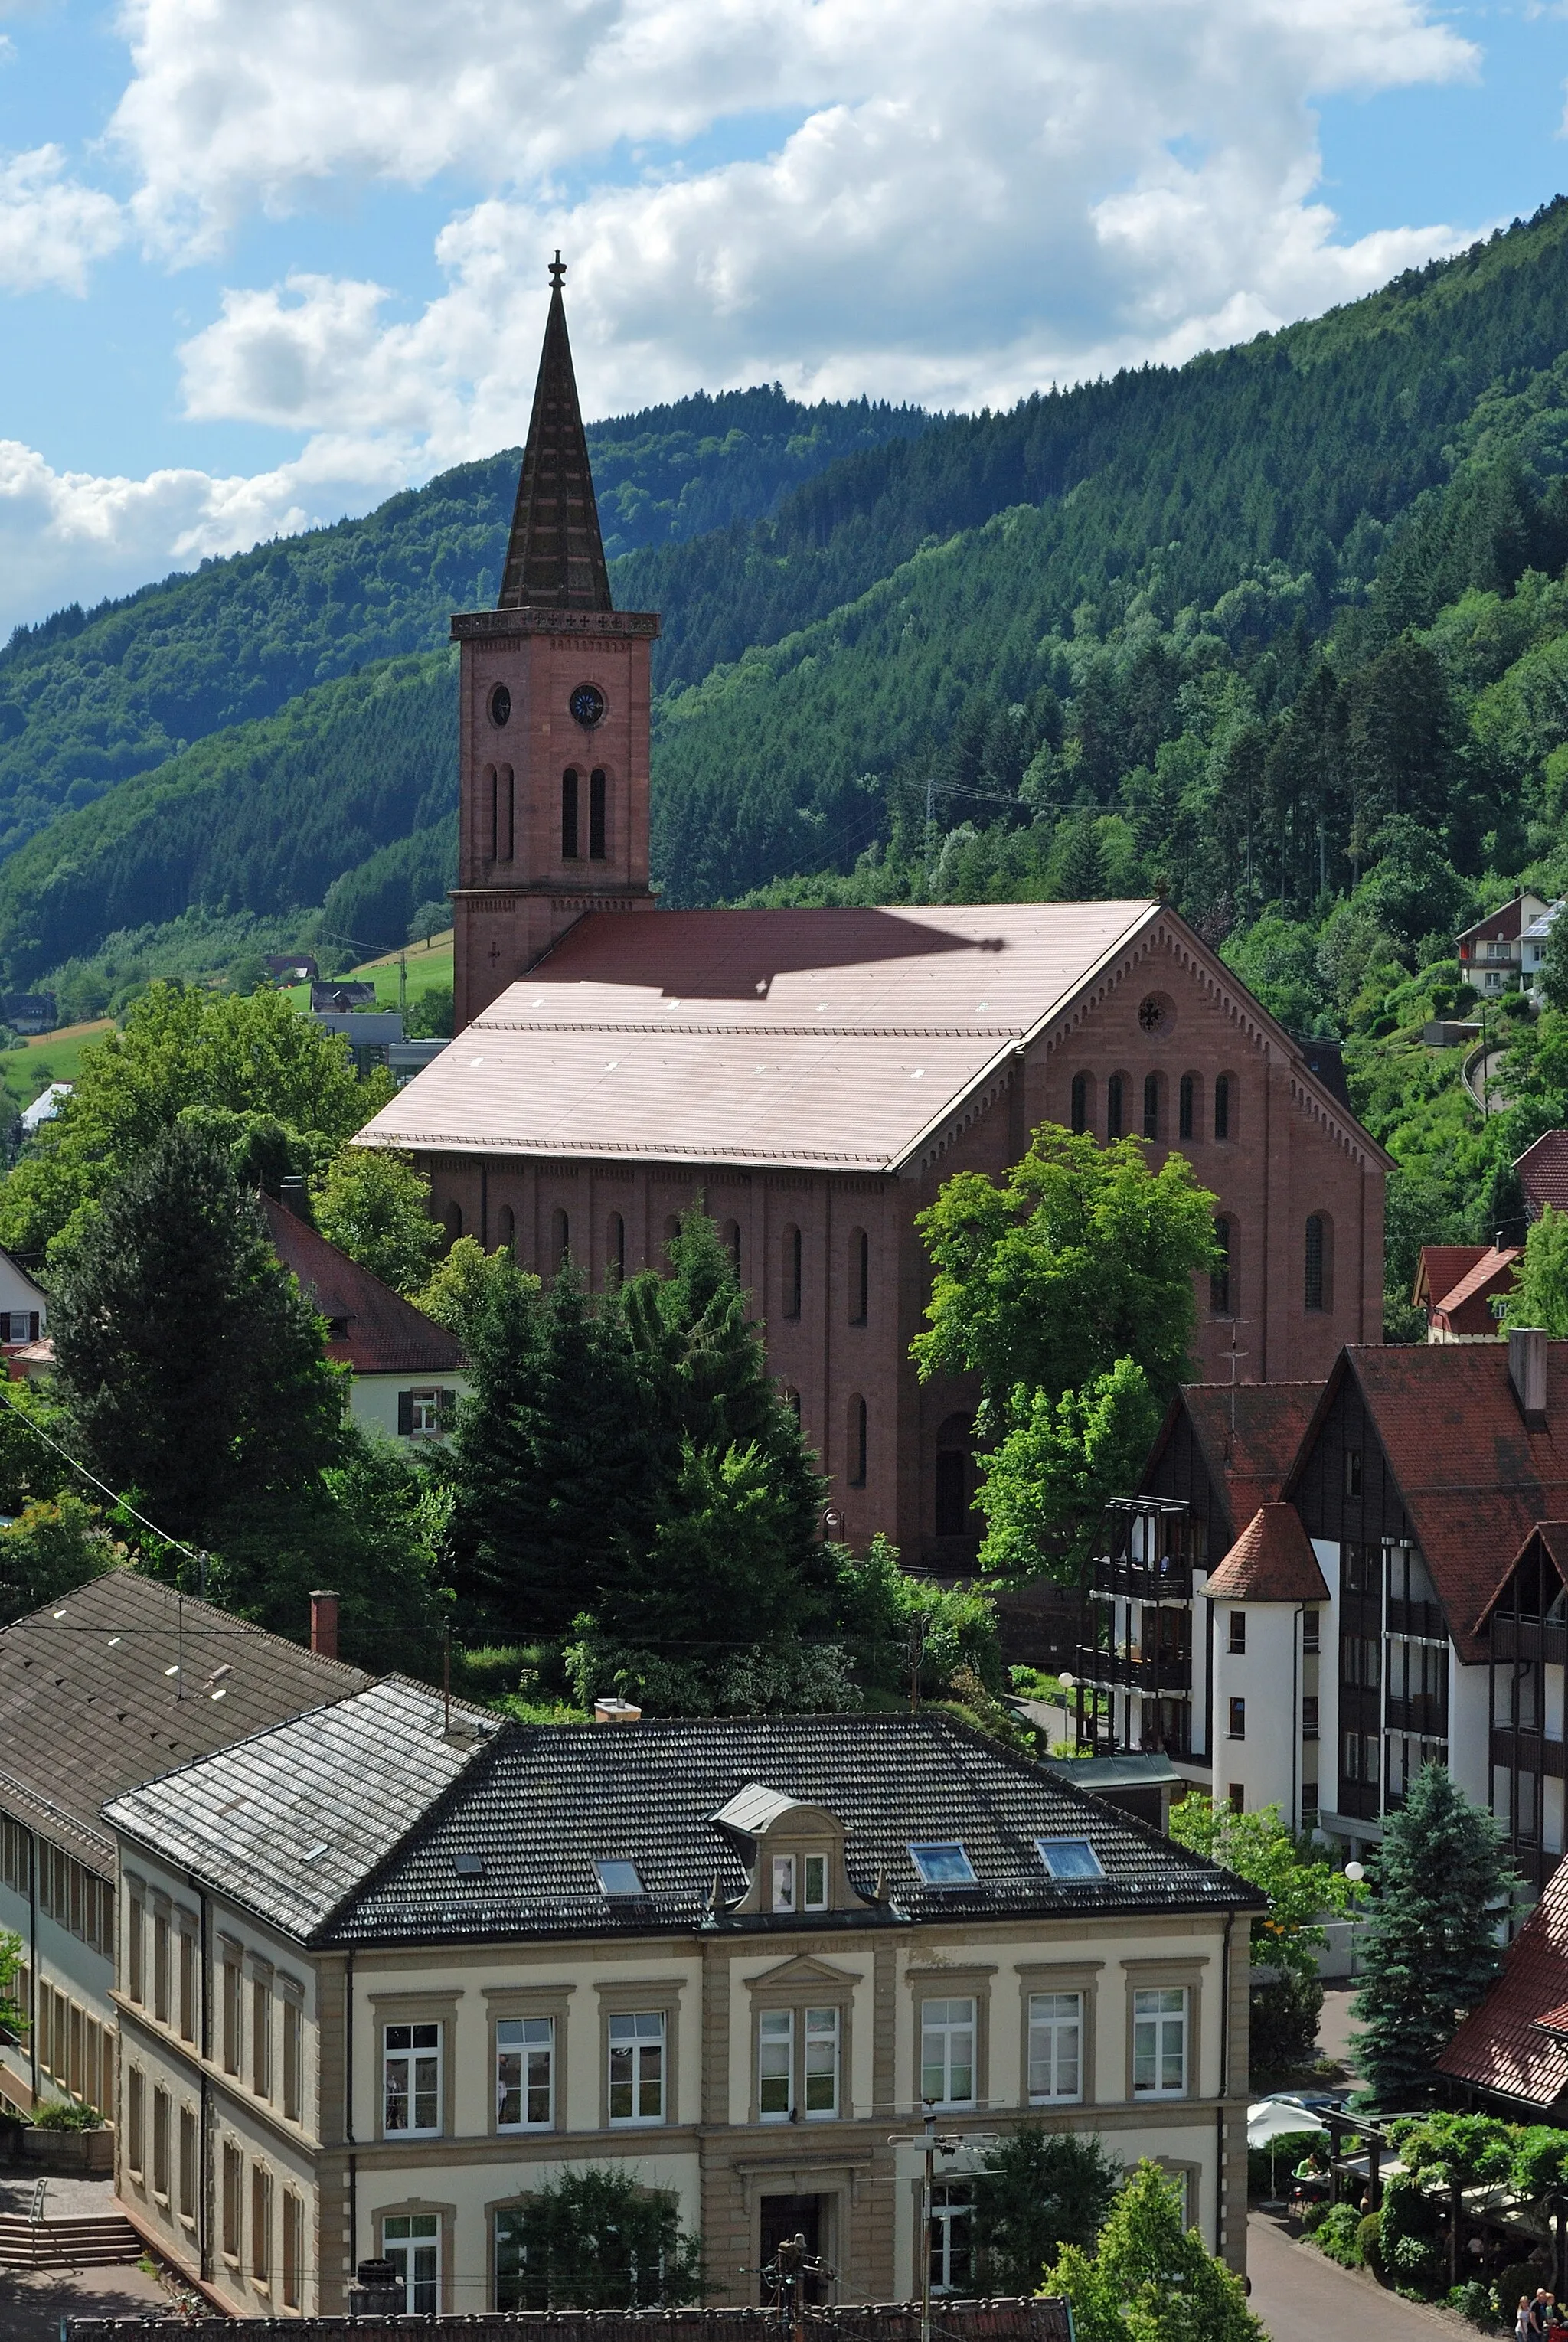 Photo showing: The protestant church in Schiltach in the Black Forest in Germany.